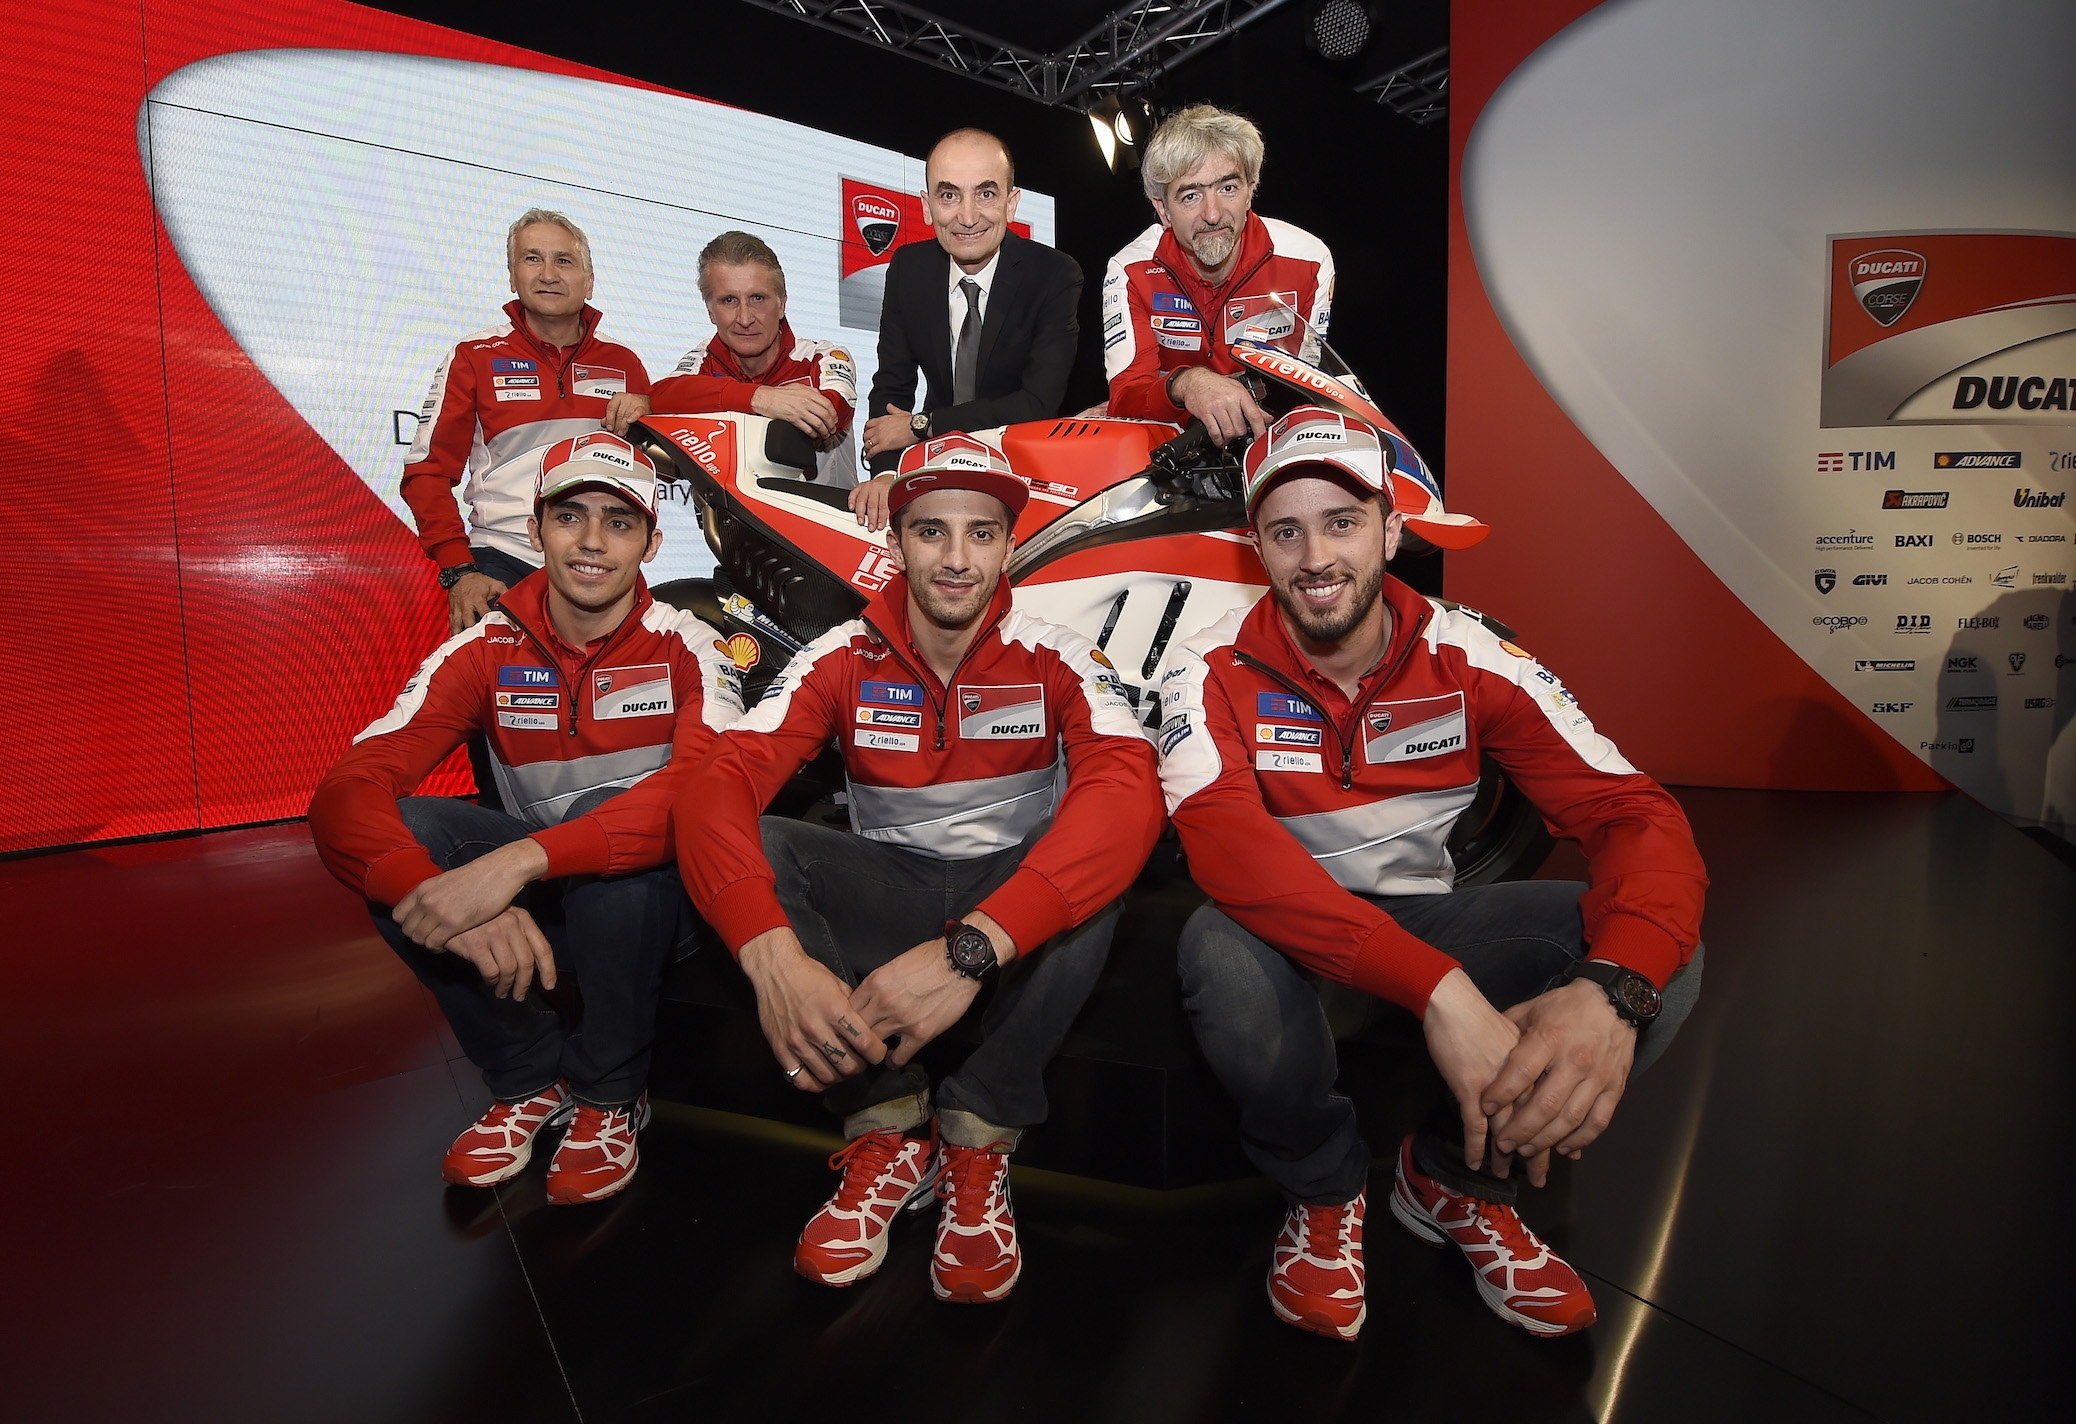 GIVI+is+the+new+sponsor+of+DUCATI+TEAM+at+the+motoGP